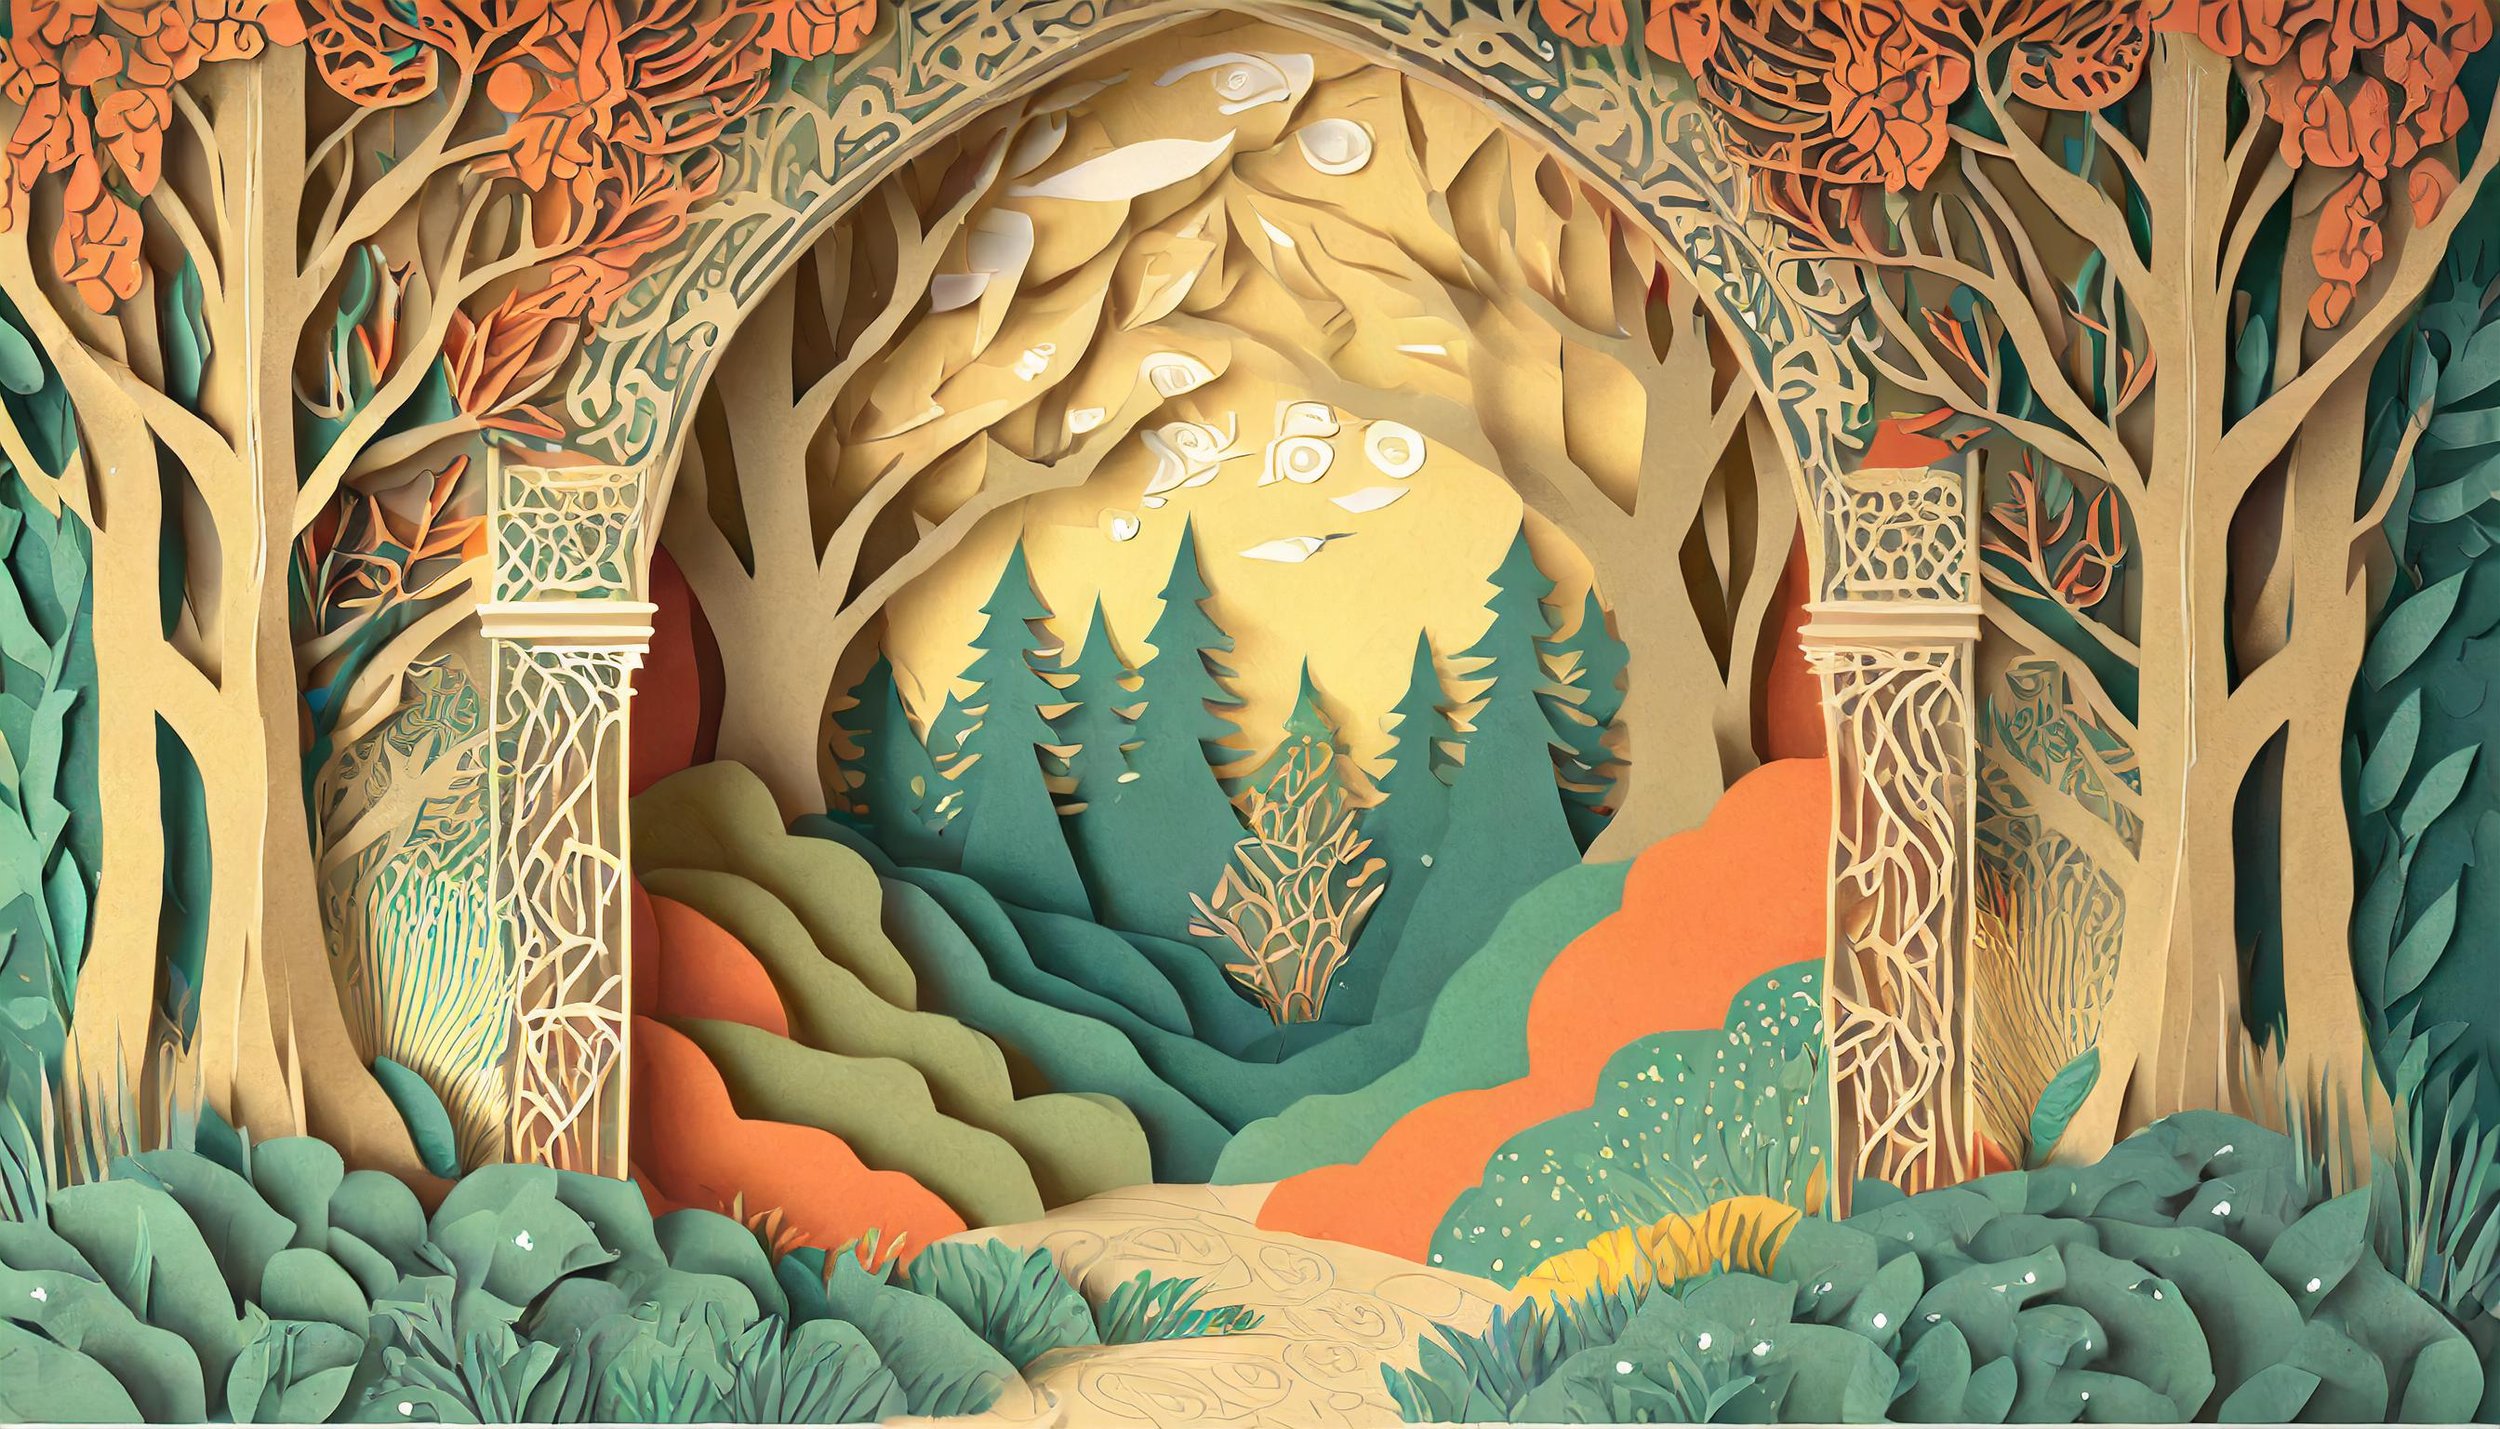 Firefly flat illustration of the entrance to a medieval forest 2736.jpg